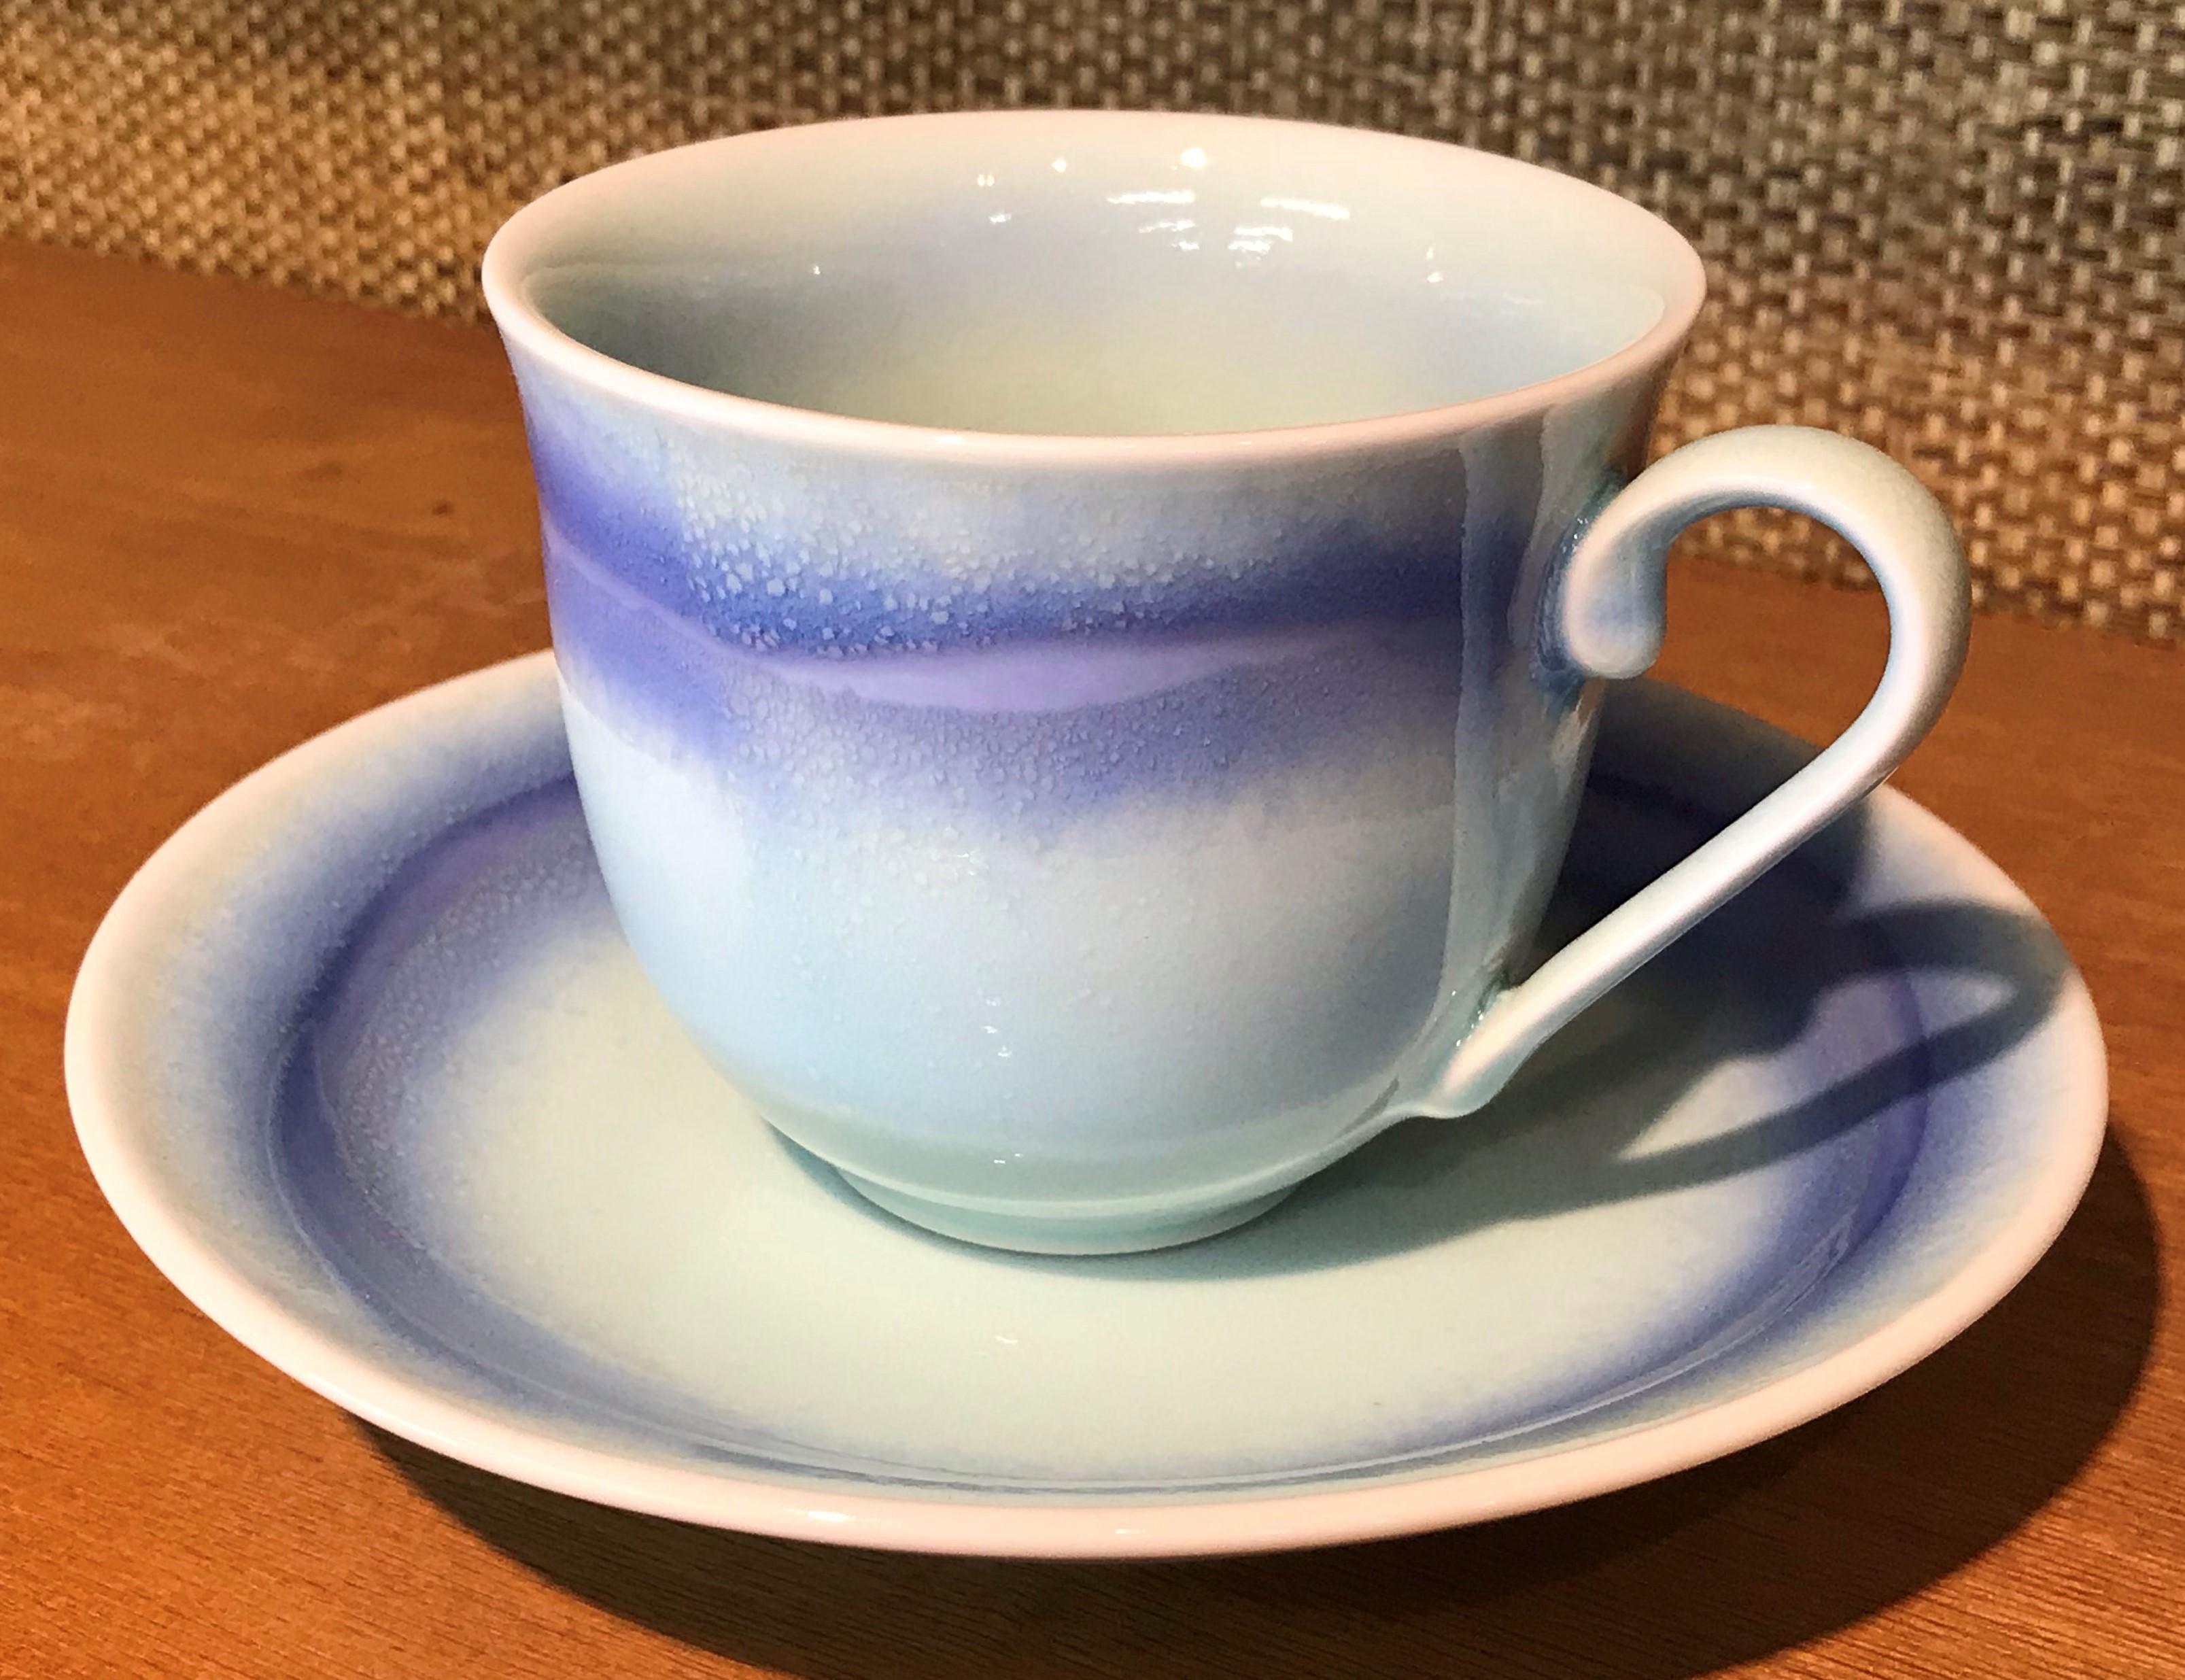 Exceptional Japanese contemporary porcelain cup and saucer, hand-glazed in stunning blue and white on a beautifully shaped body. This is a signed work by a highly acclaimed award-winning master porcelain artist from the Imari-Arita region of Japan.